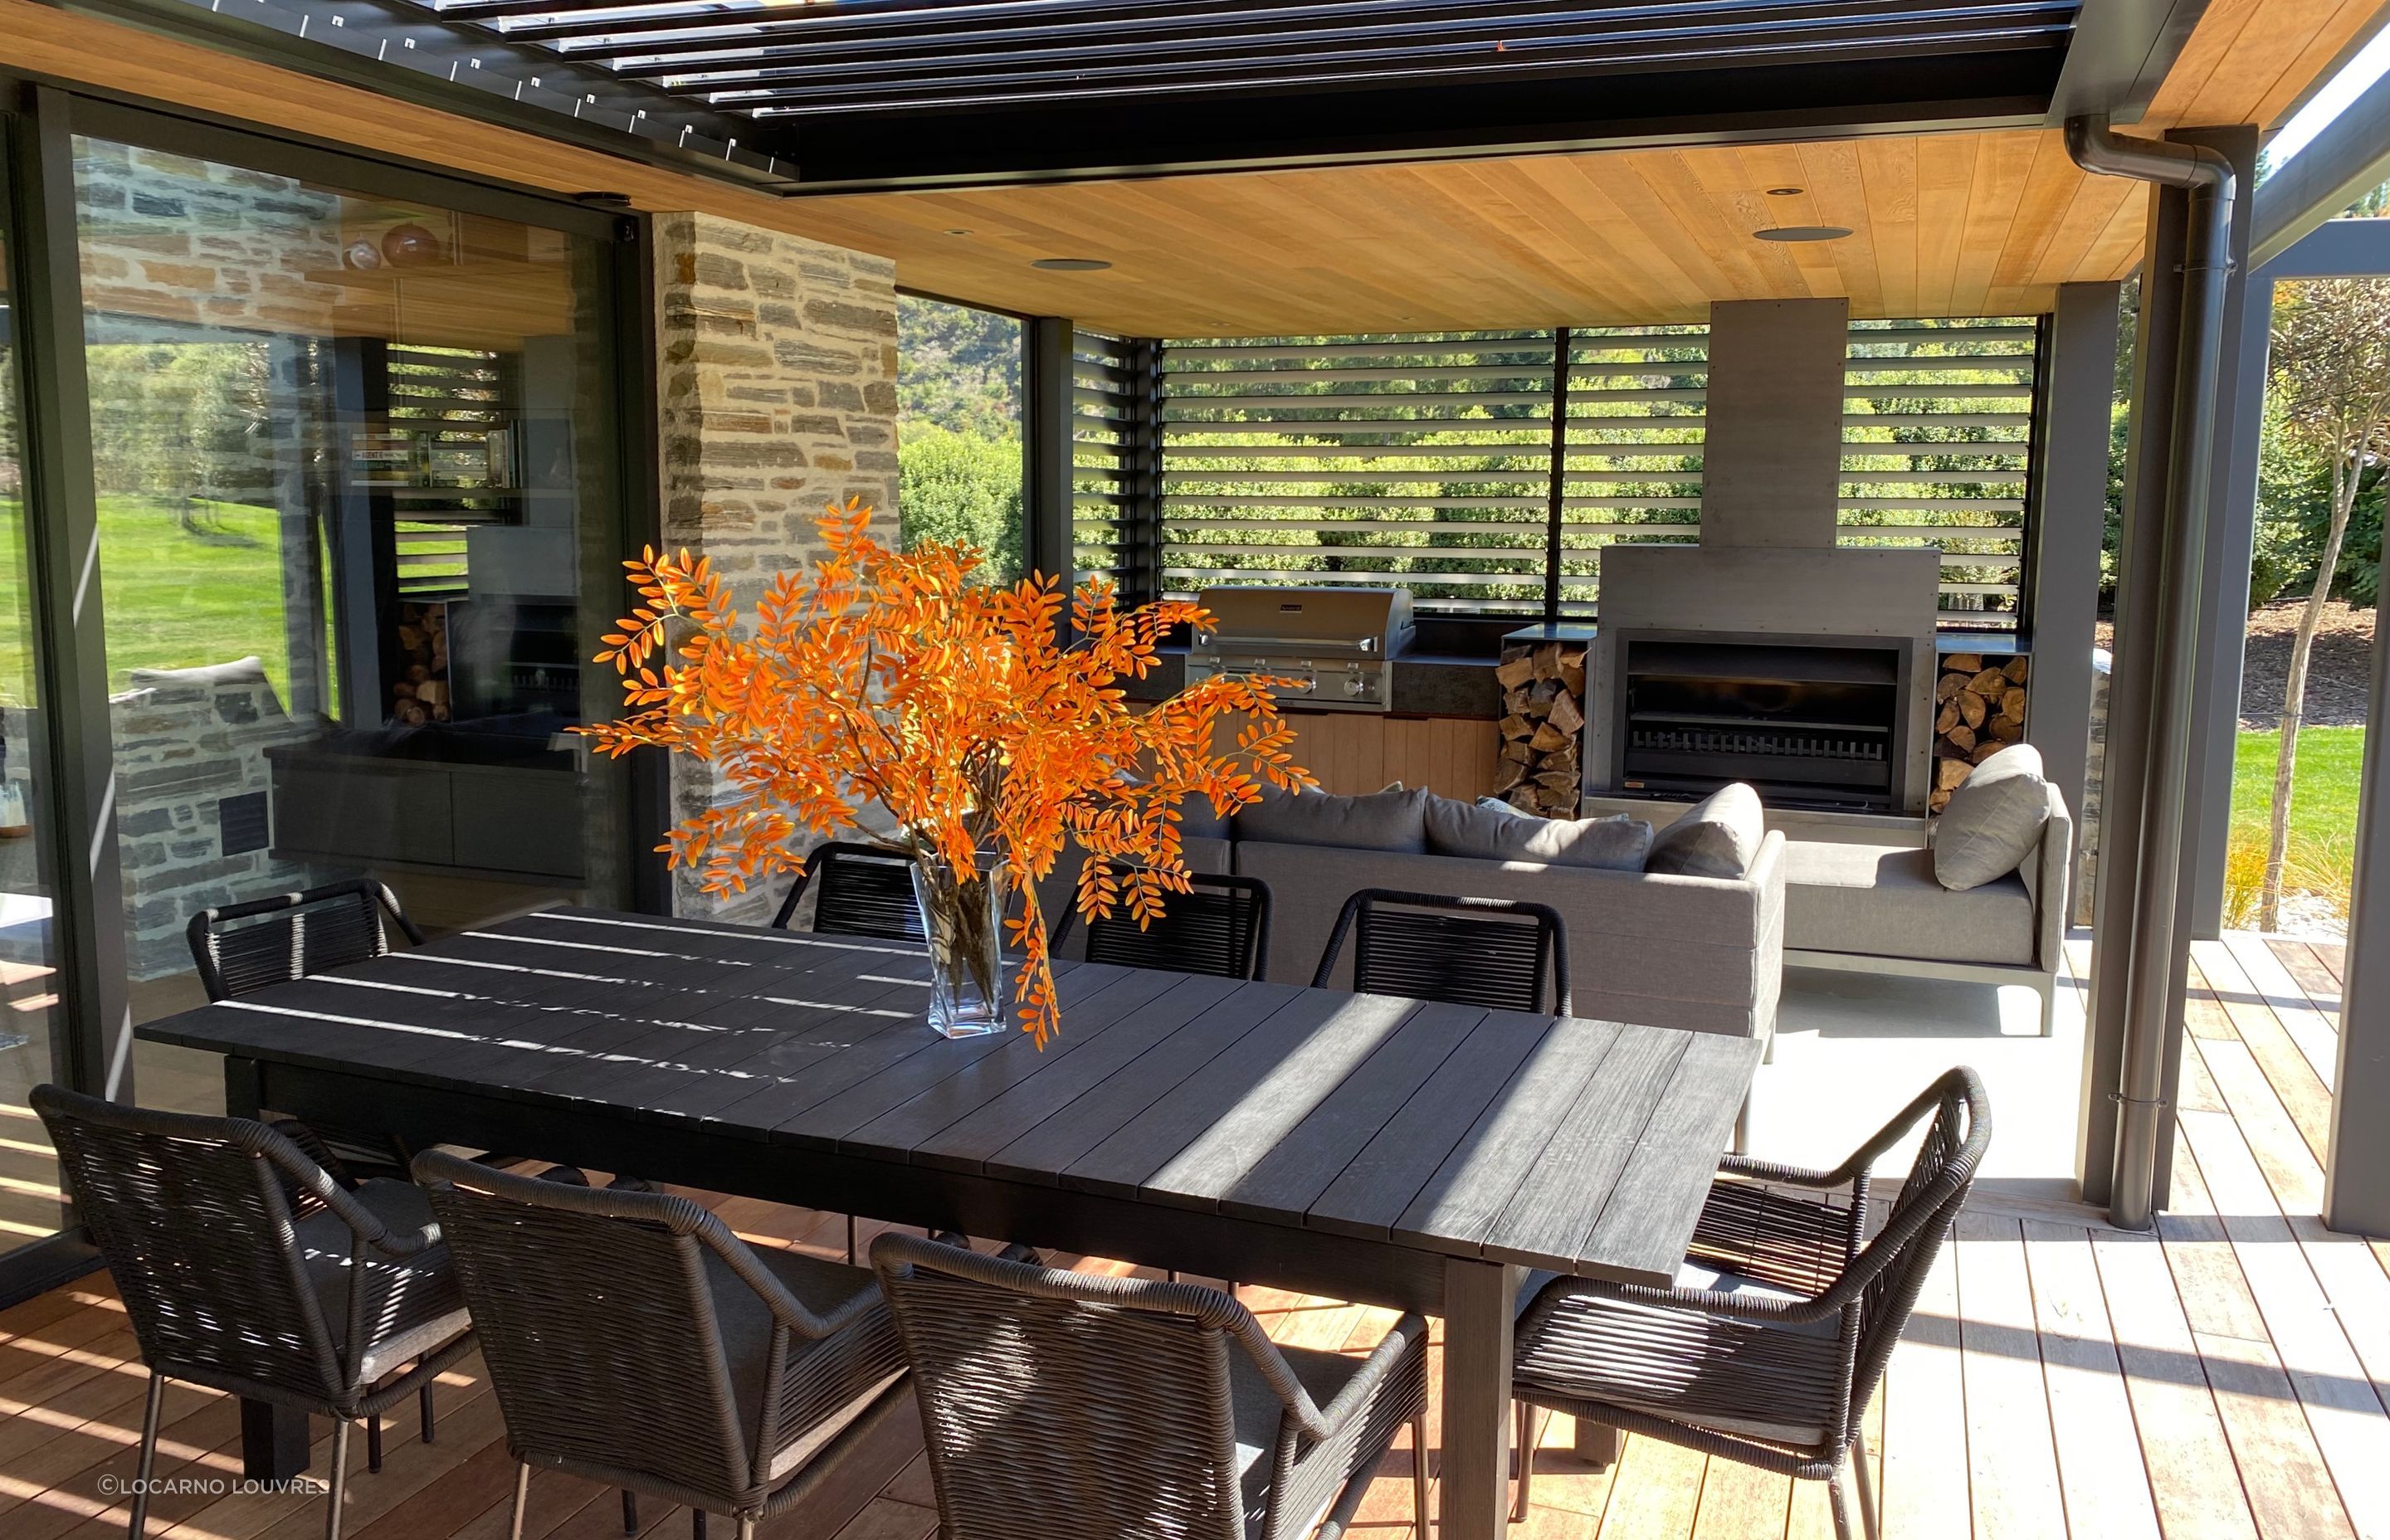 The motorised Locarno RL200 louvres create a sheltered outdoor space.